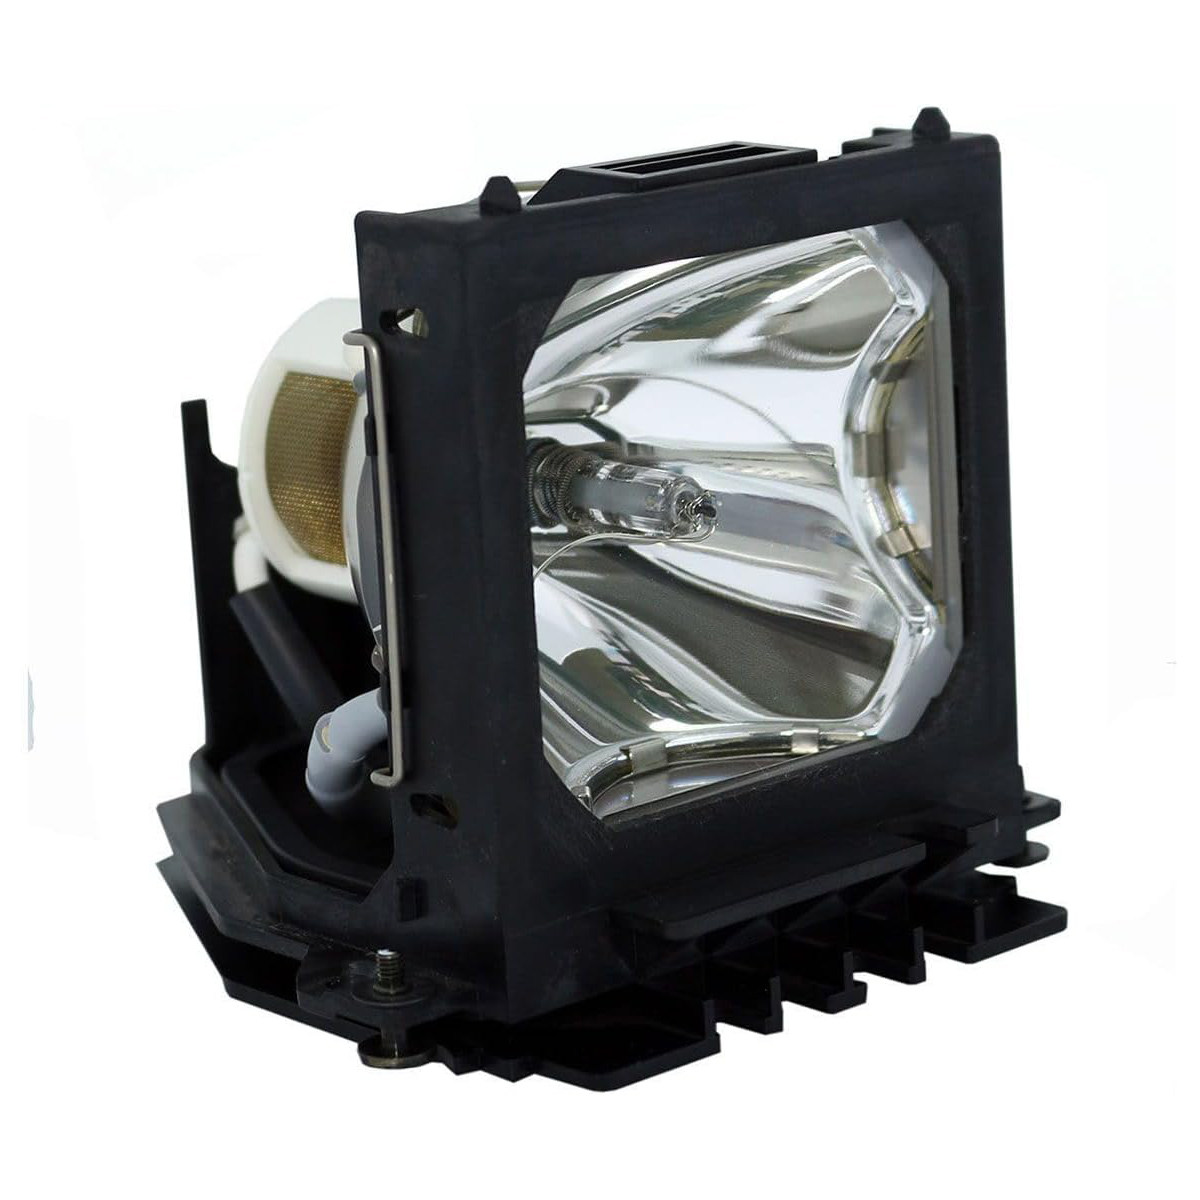 Replacement Projector lamp 456-238 For Dukane Projector